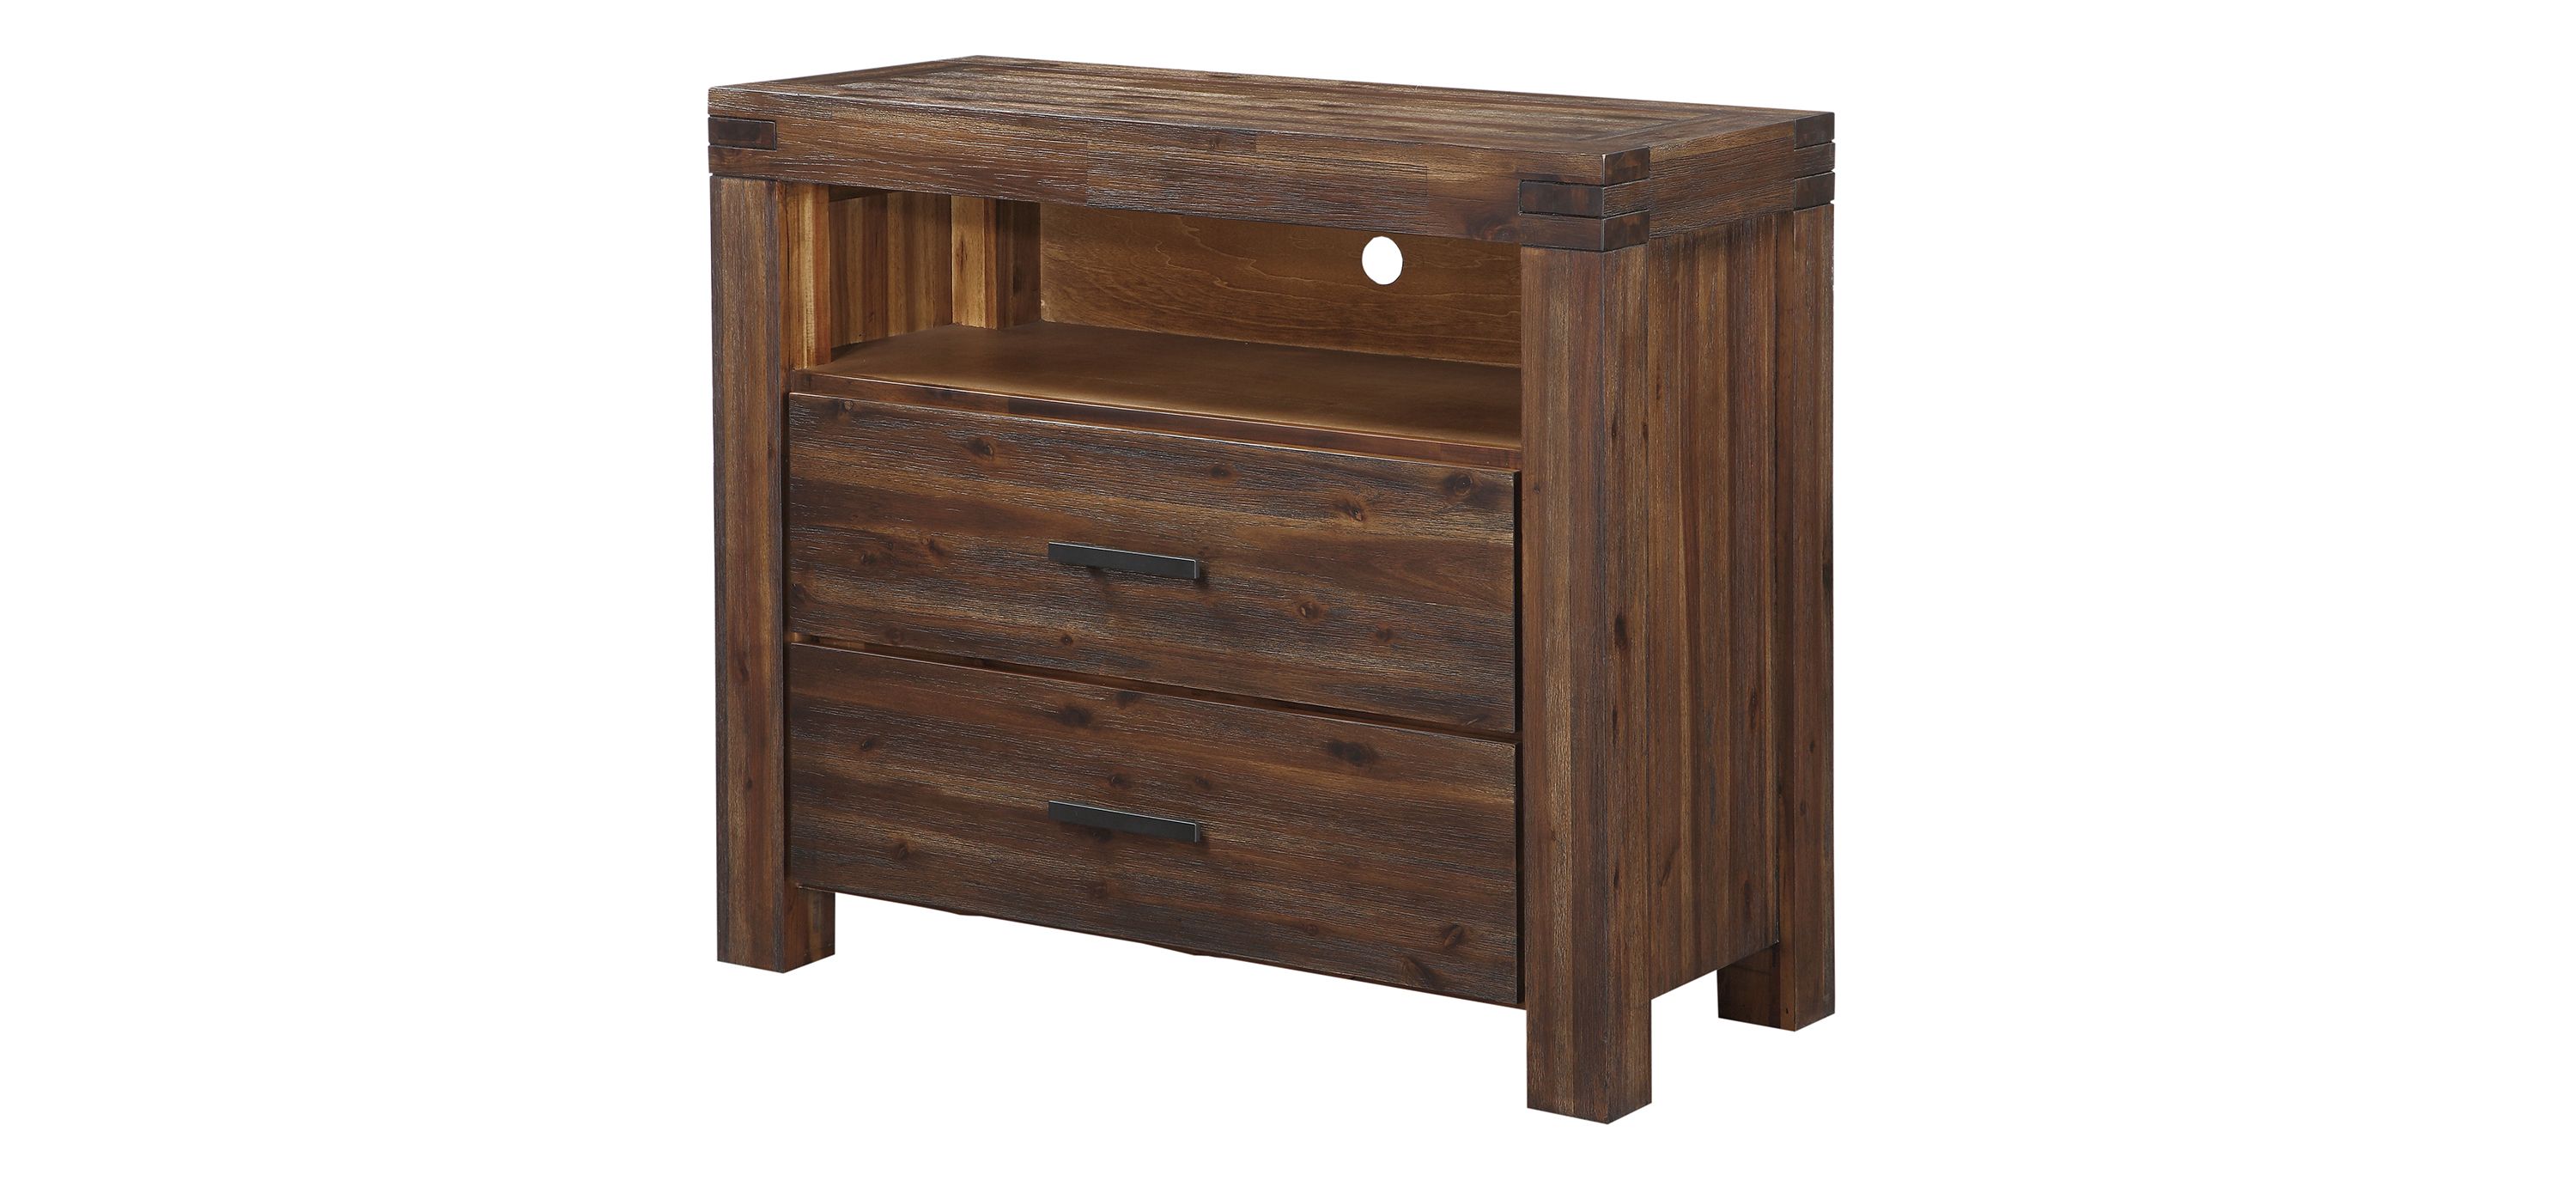 Middlefield Media Chest